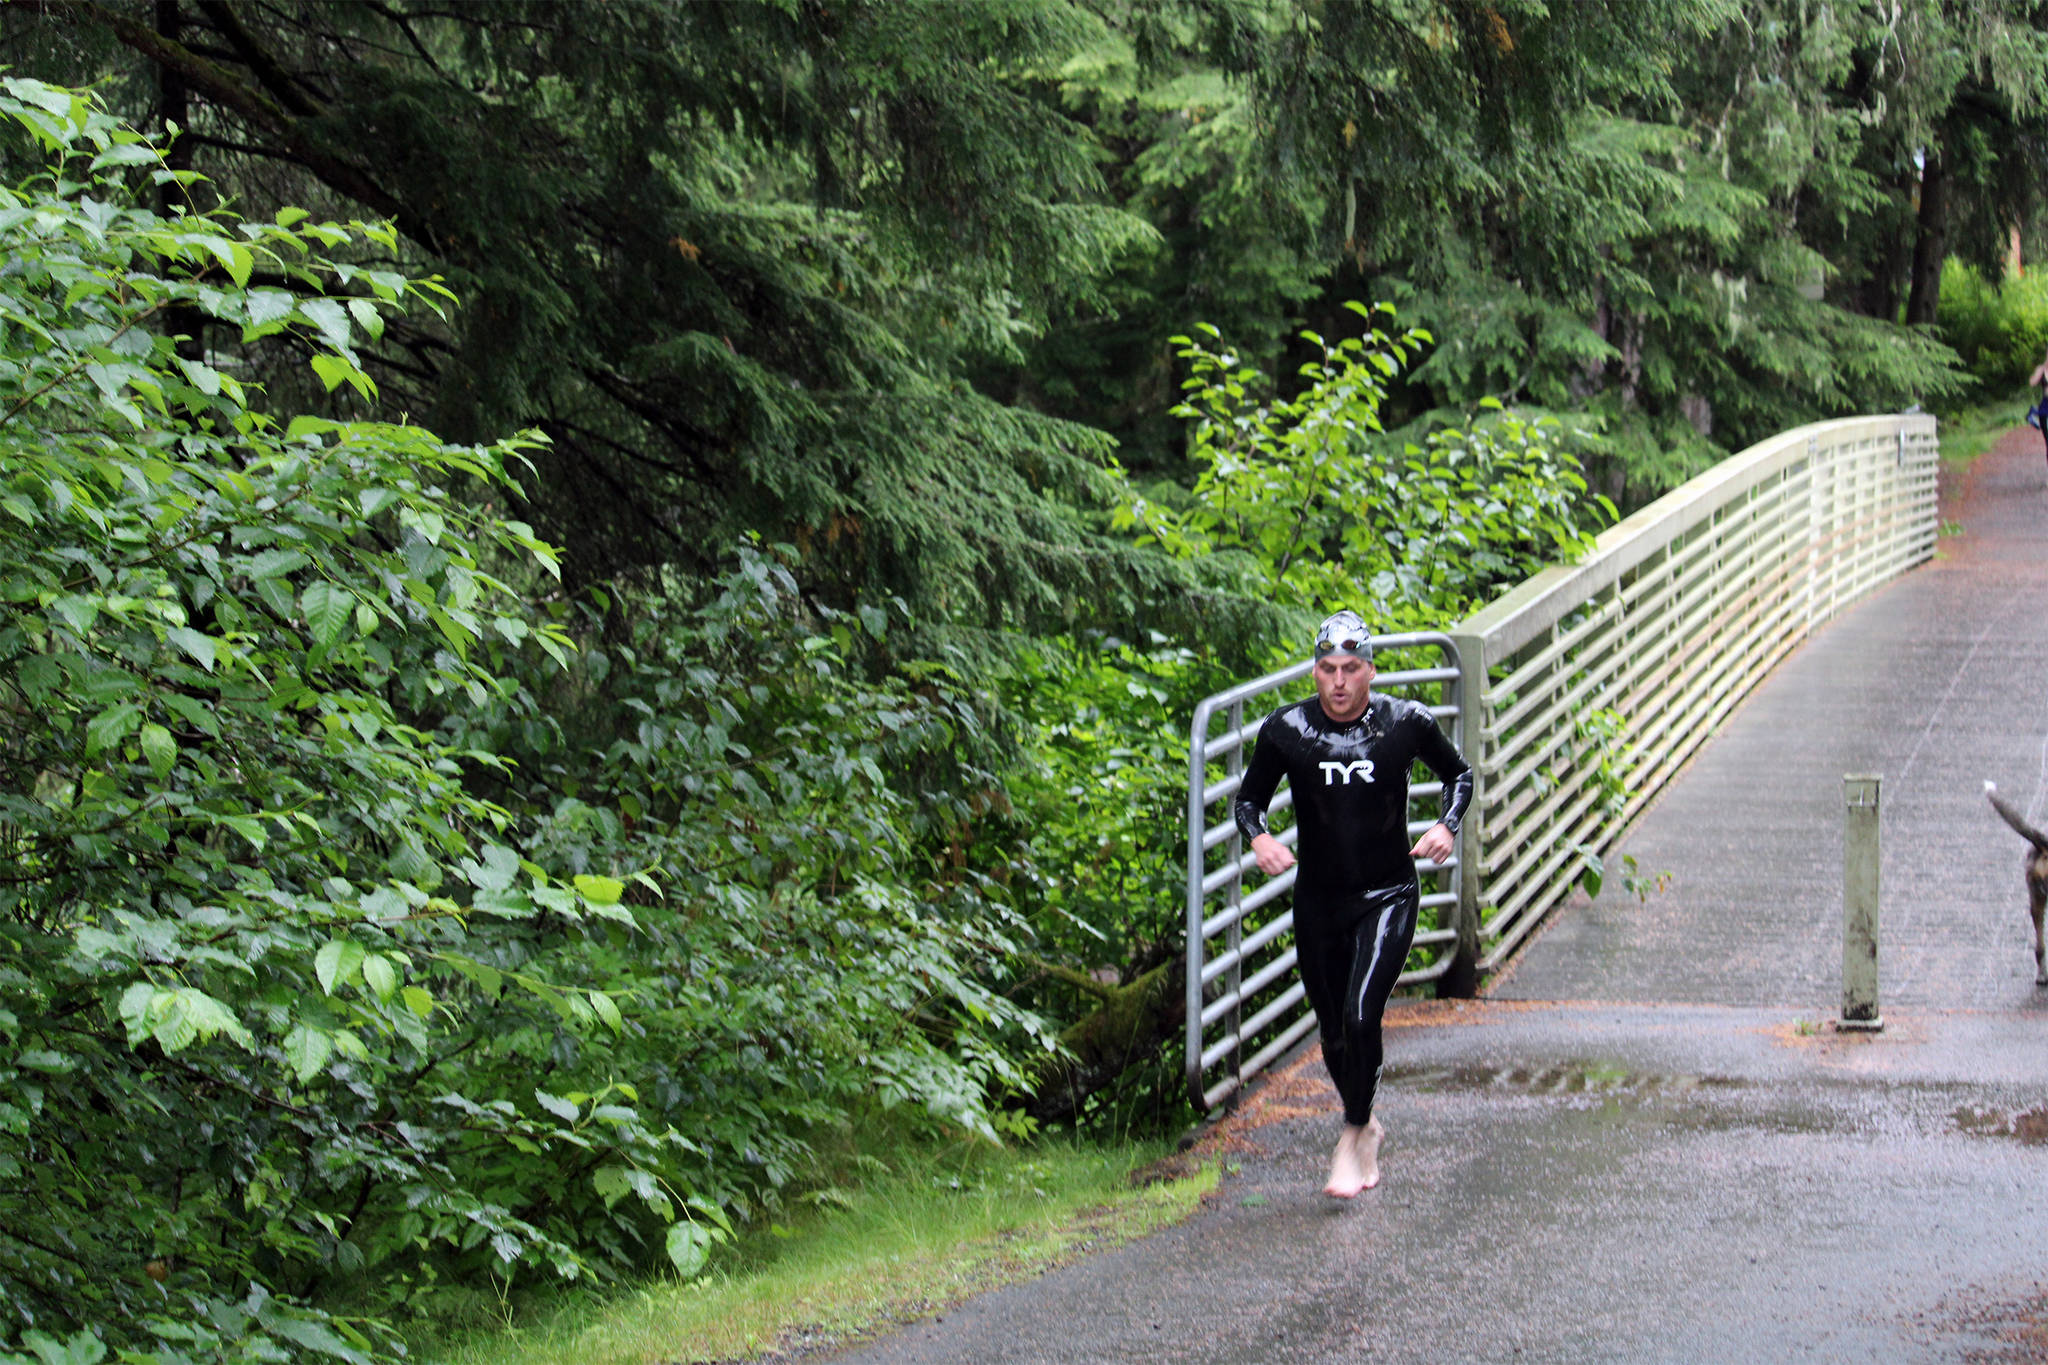 After completing the swim in Auke Lake, a triathlete runs to the bike staging area near the Mourant building to begin the cycling portion of the Aukeman Triathlon, which consisted of an out and back to the Mendenhall Glacier. (Dana Zigmund/Juneau Empire)